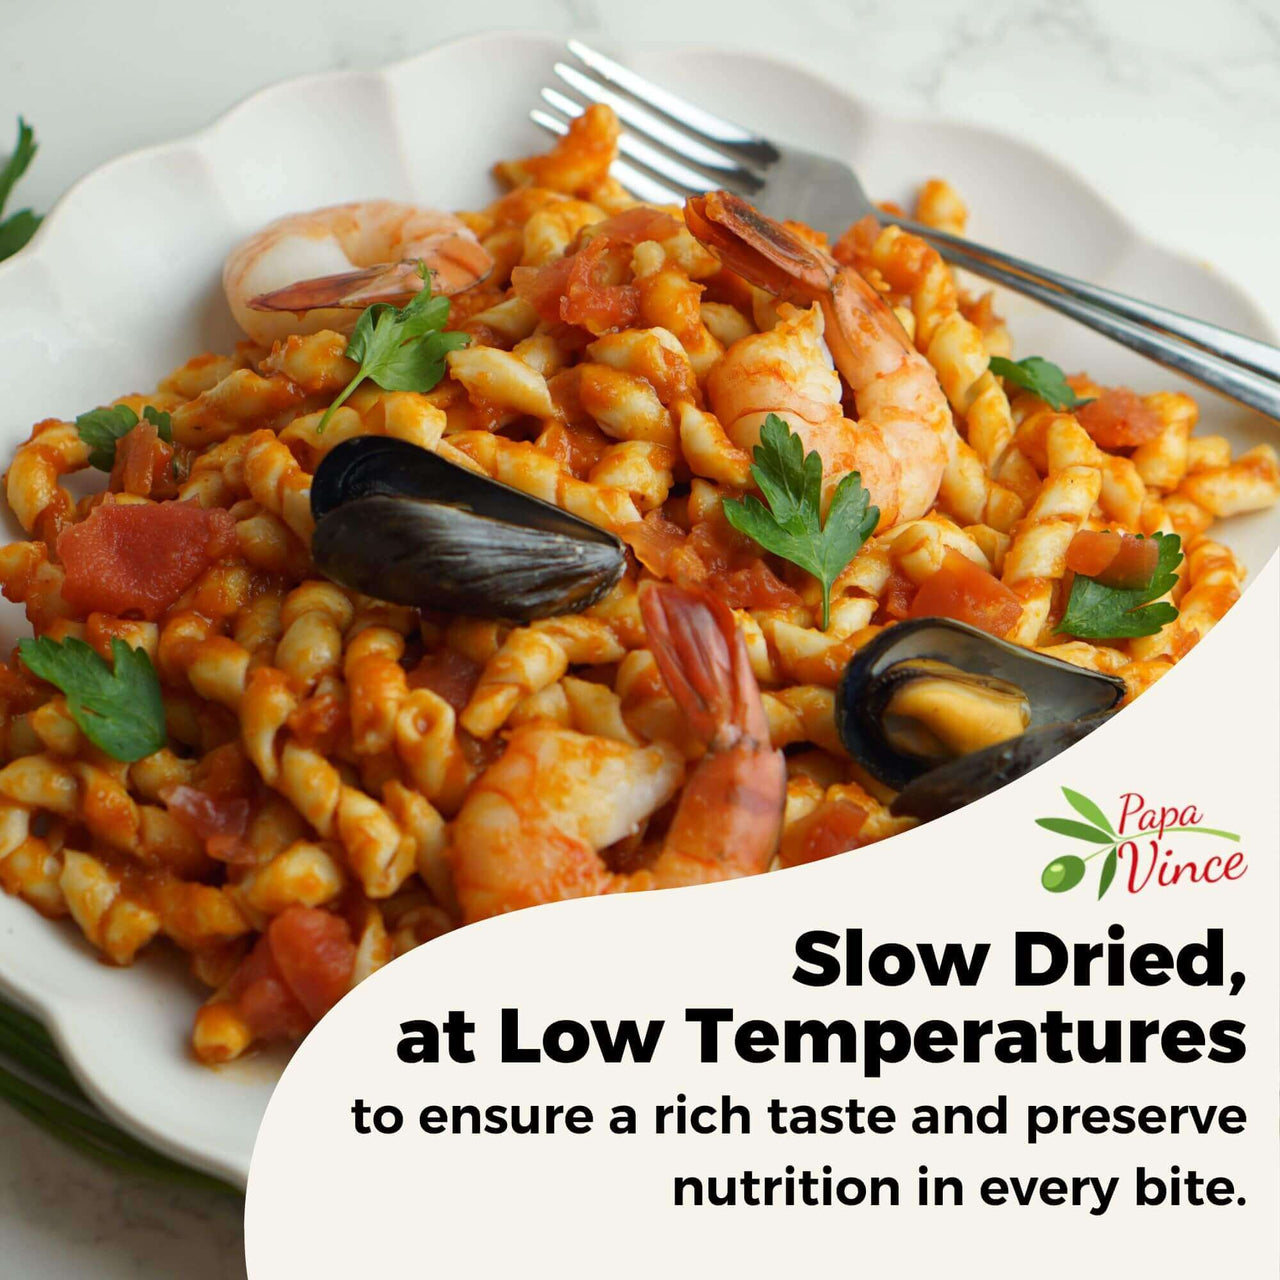 WHY Slow Dried  at Low Temperatures matters? to ensure a rich taste and preserve nutrition in every bite.